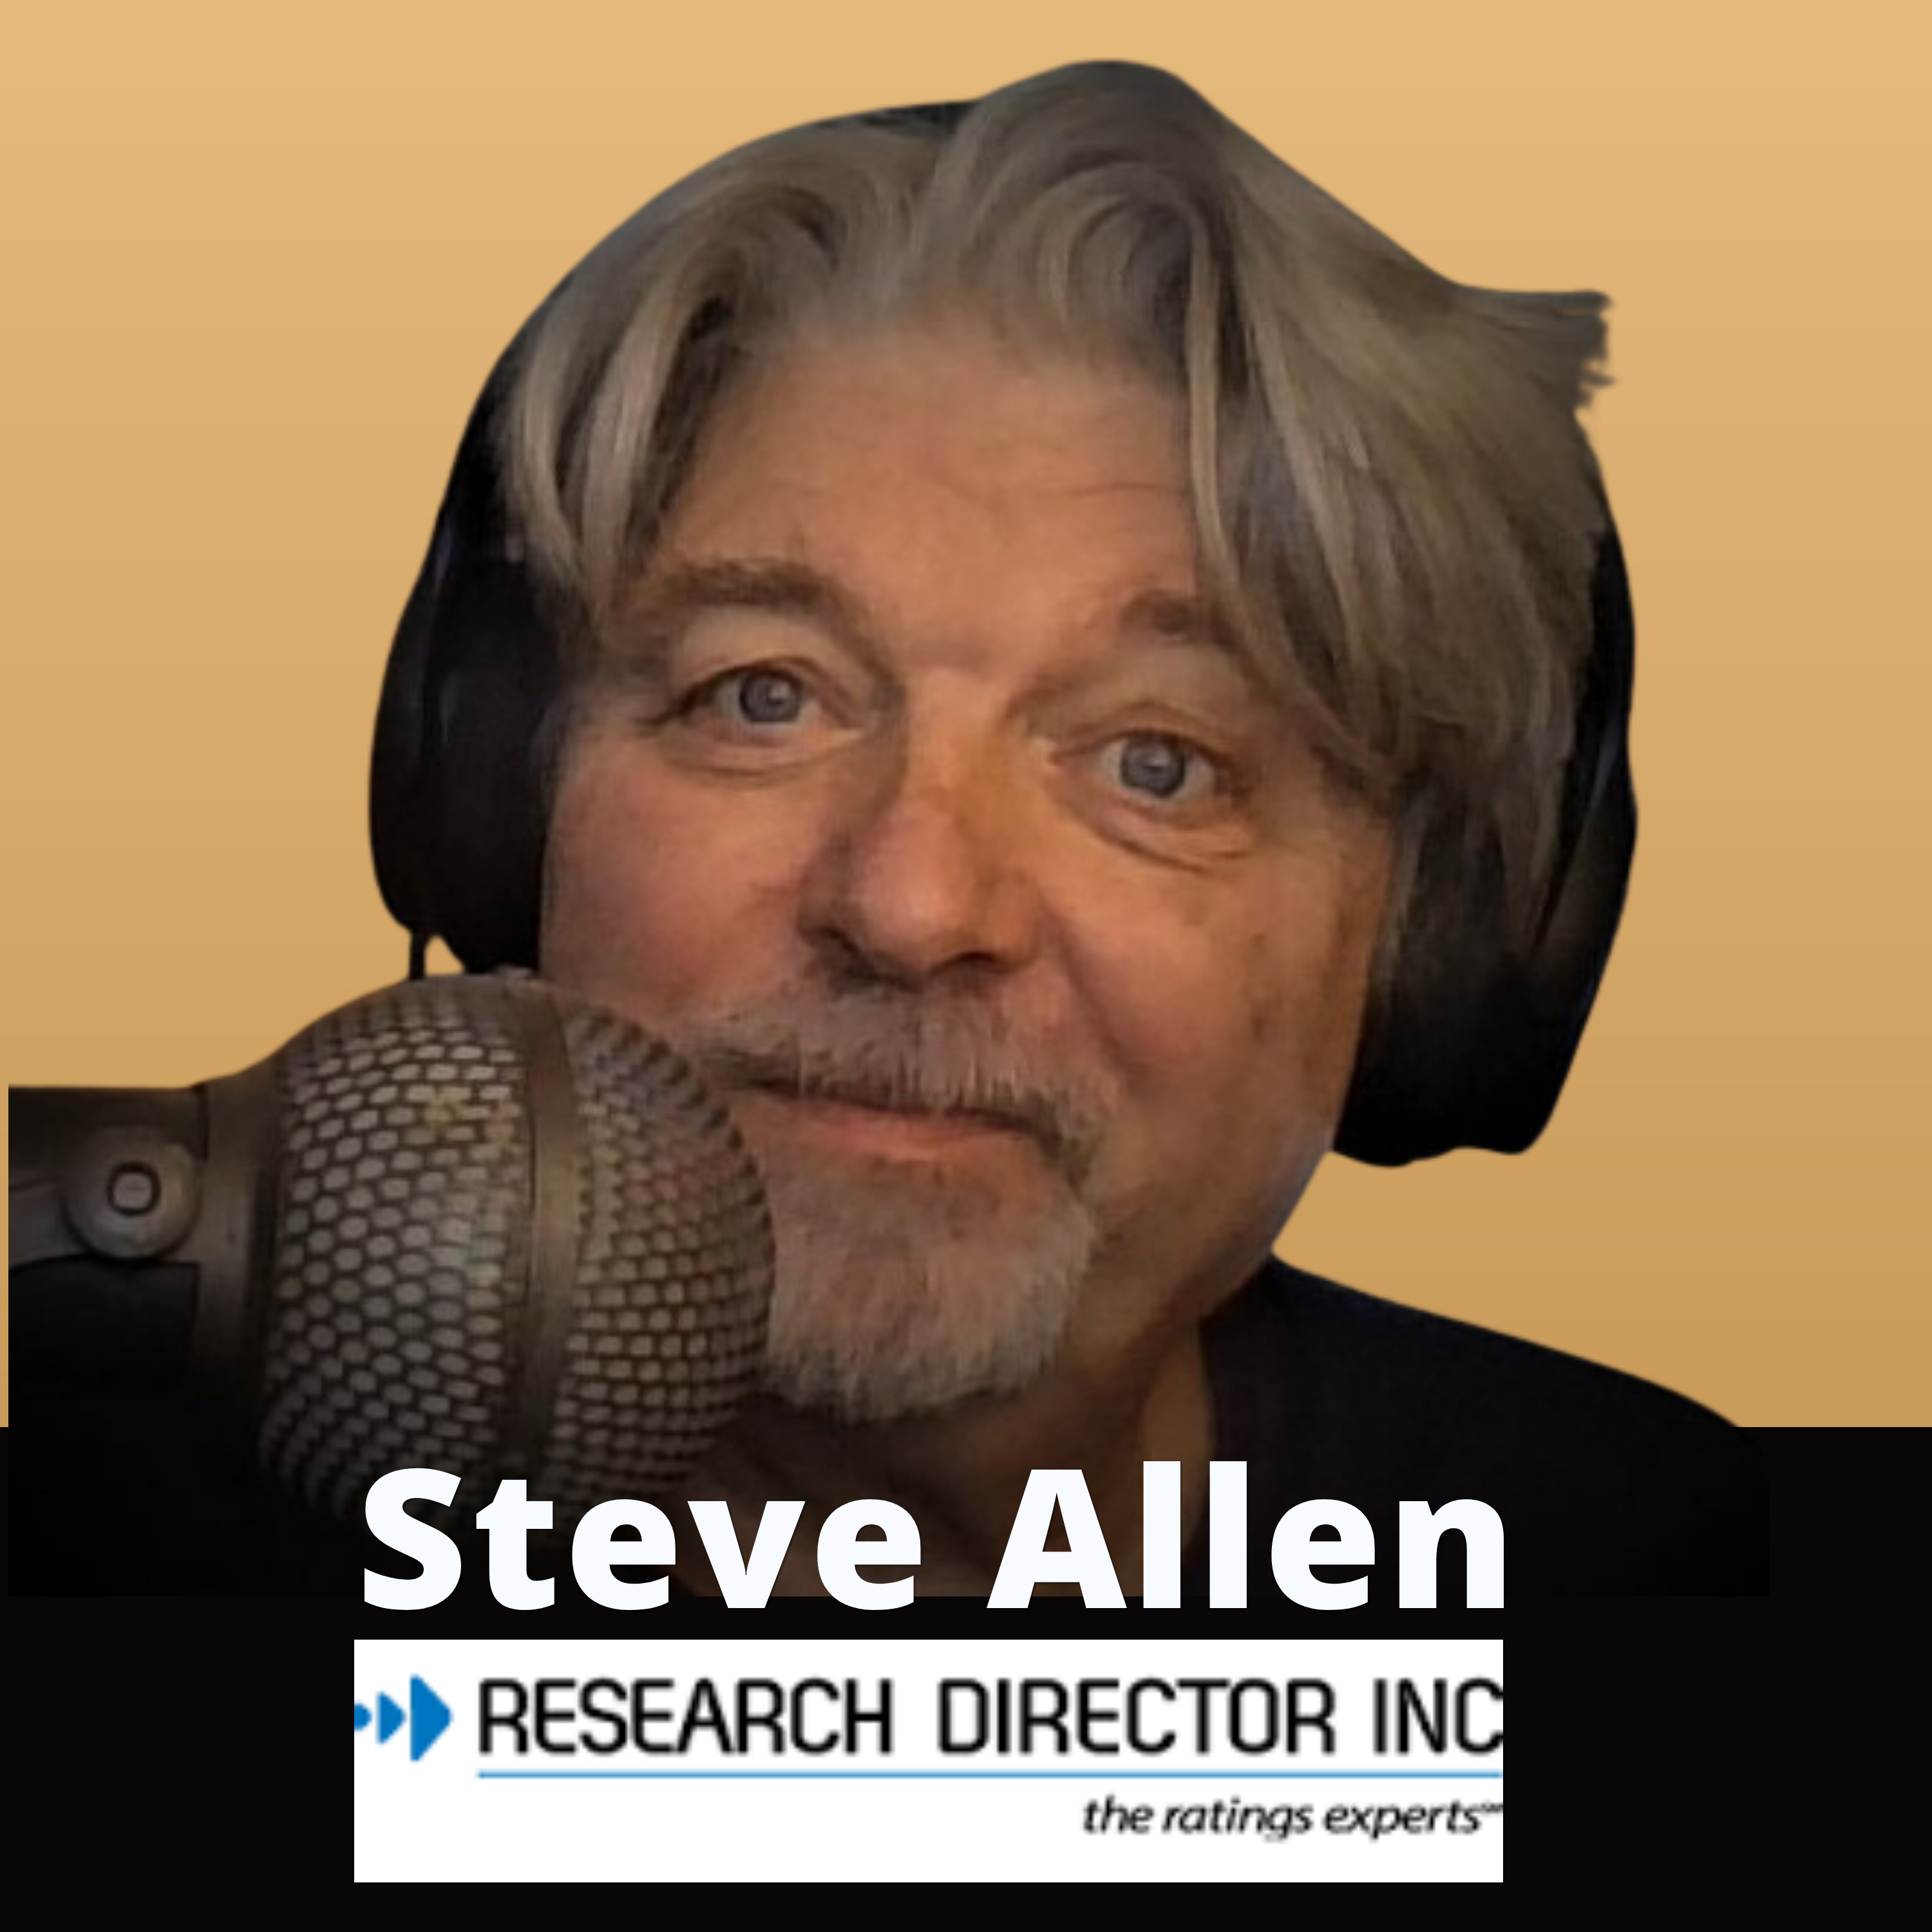 Nielsen Ratings: Are They Still the Gold Standard? Guest: Steve Allan - The Research Director, Inc.